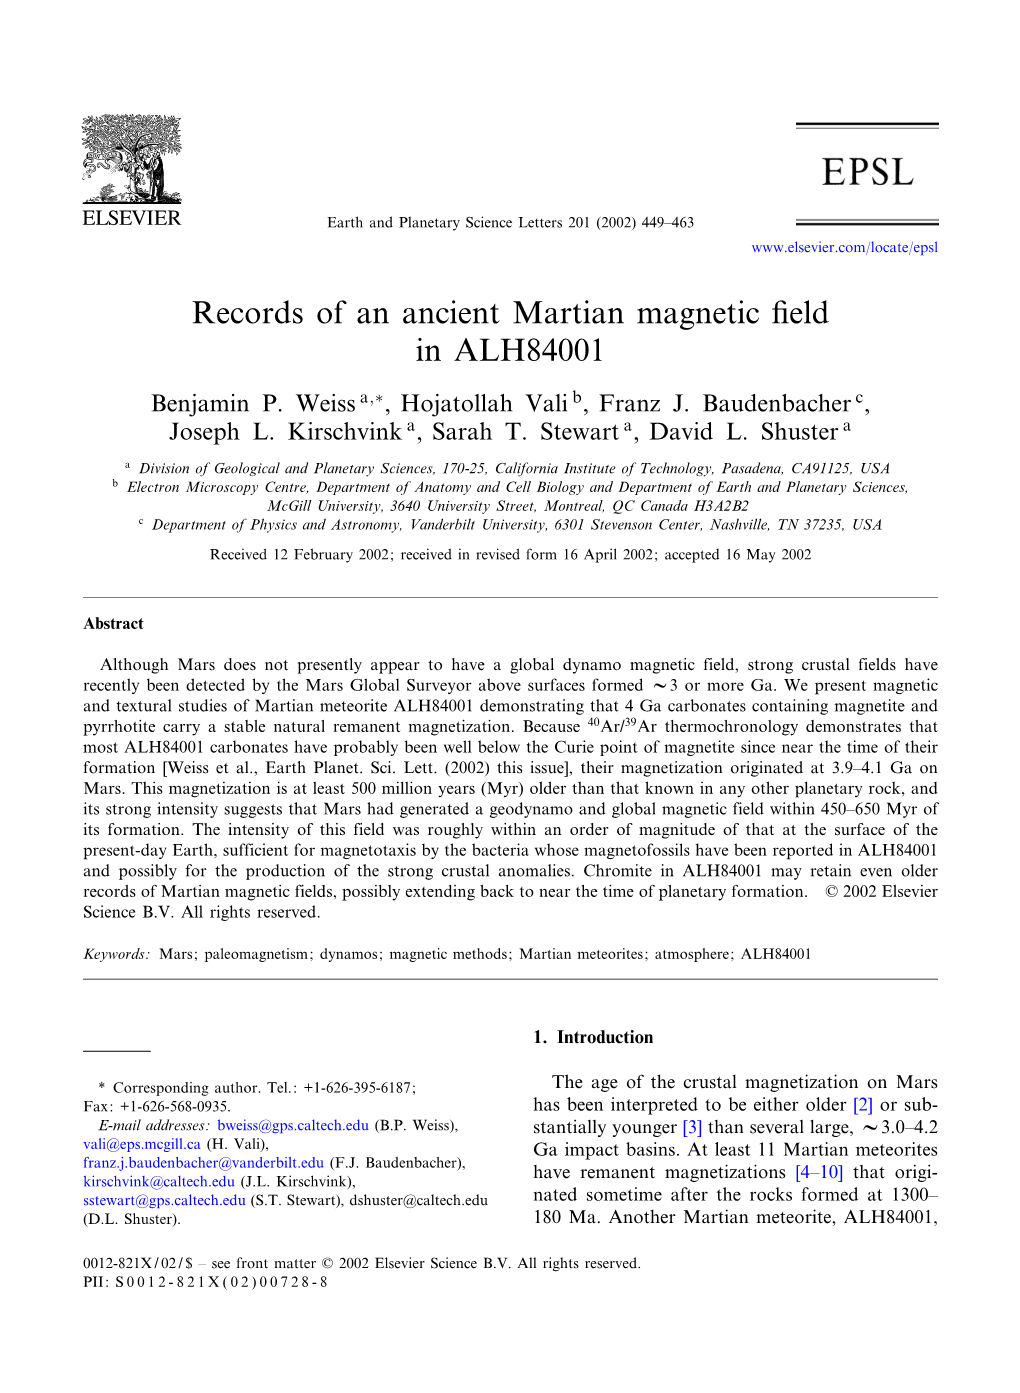 Records of an Ancient Martian Magnetic ¢Eld in ALH84001